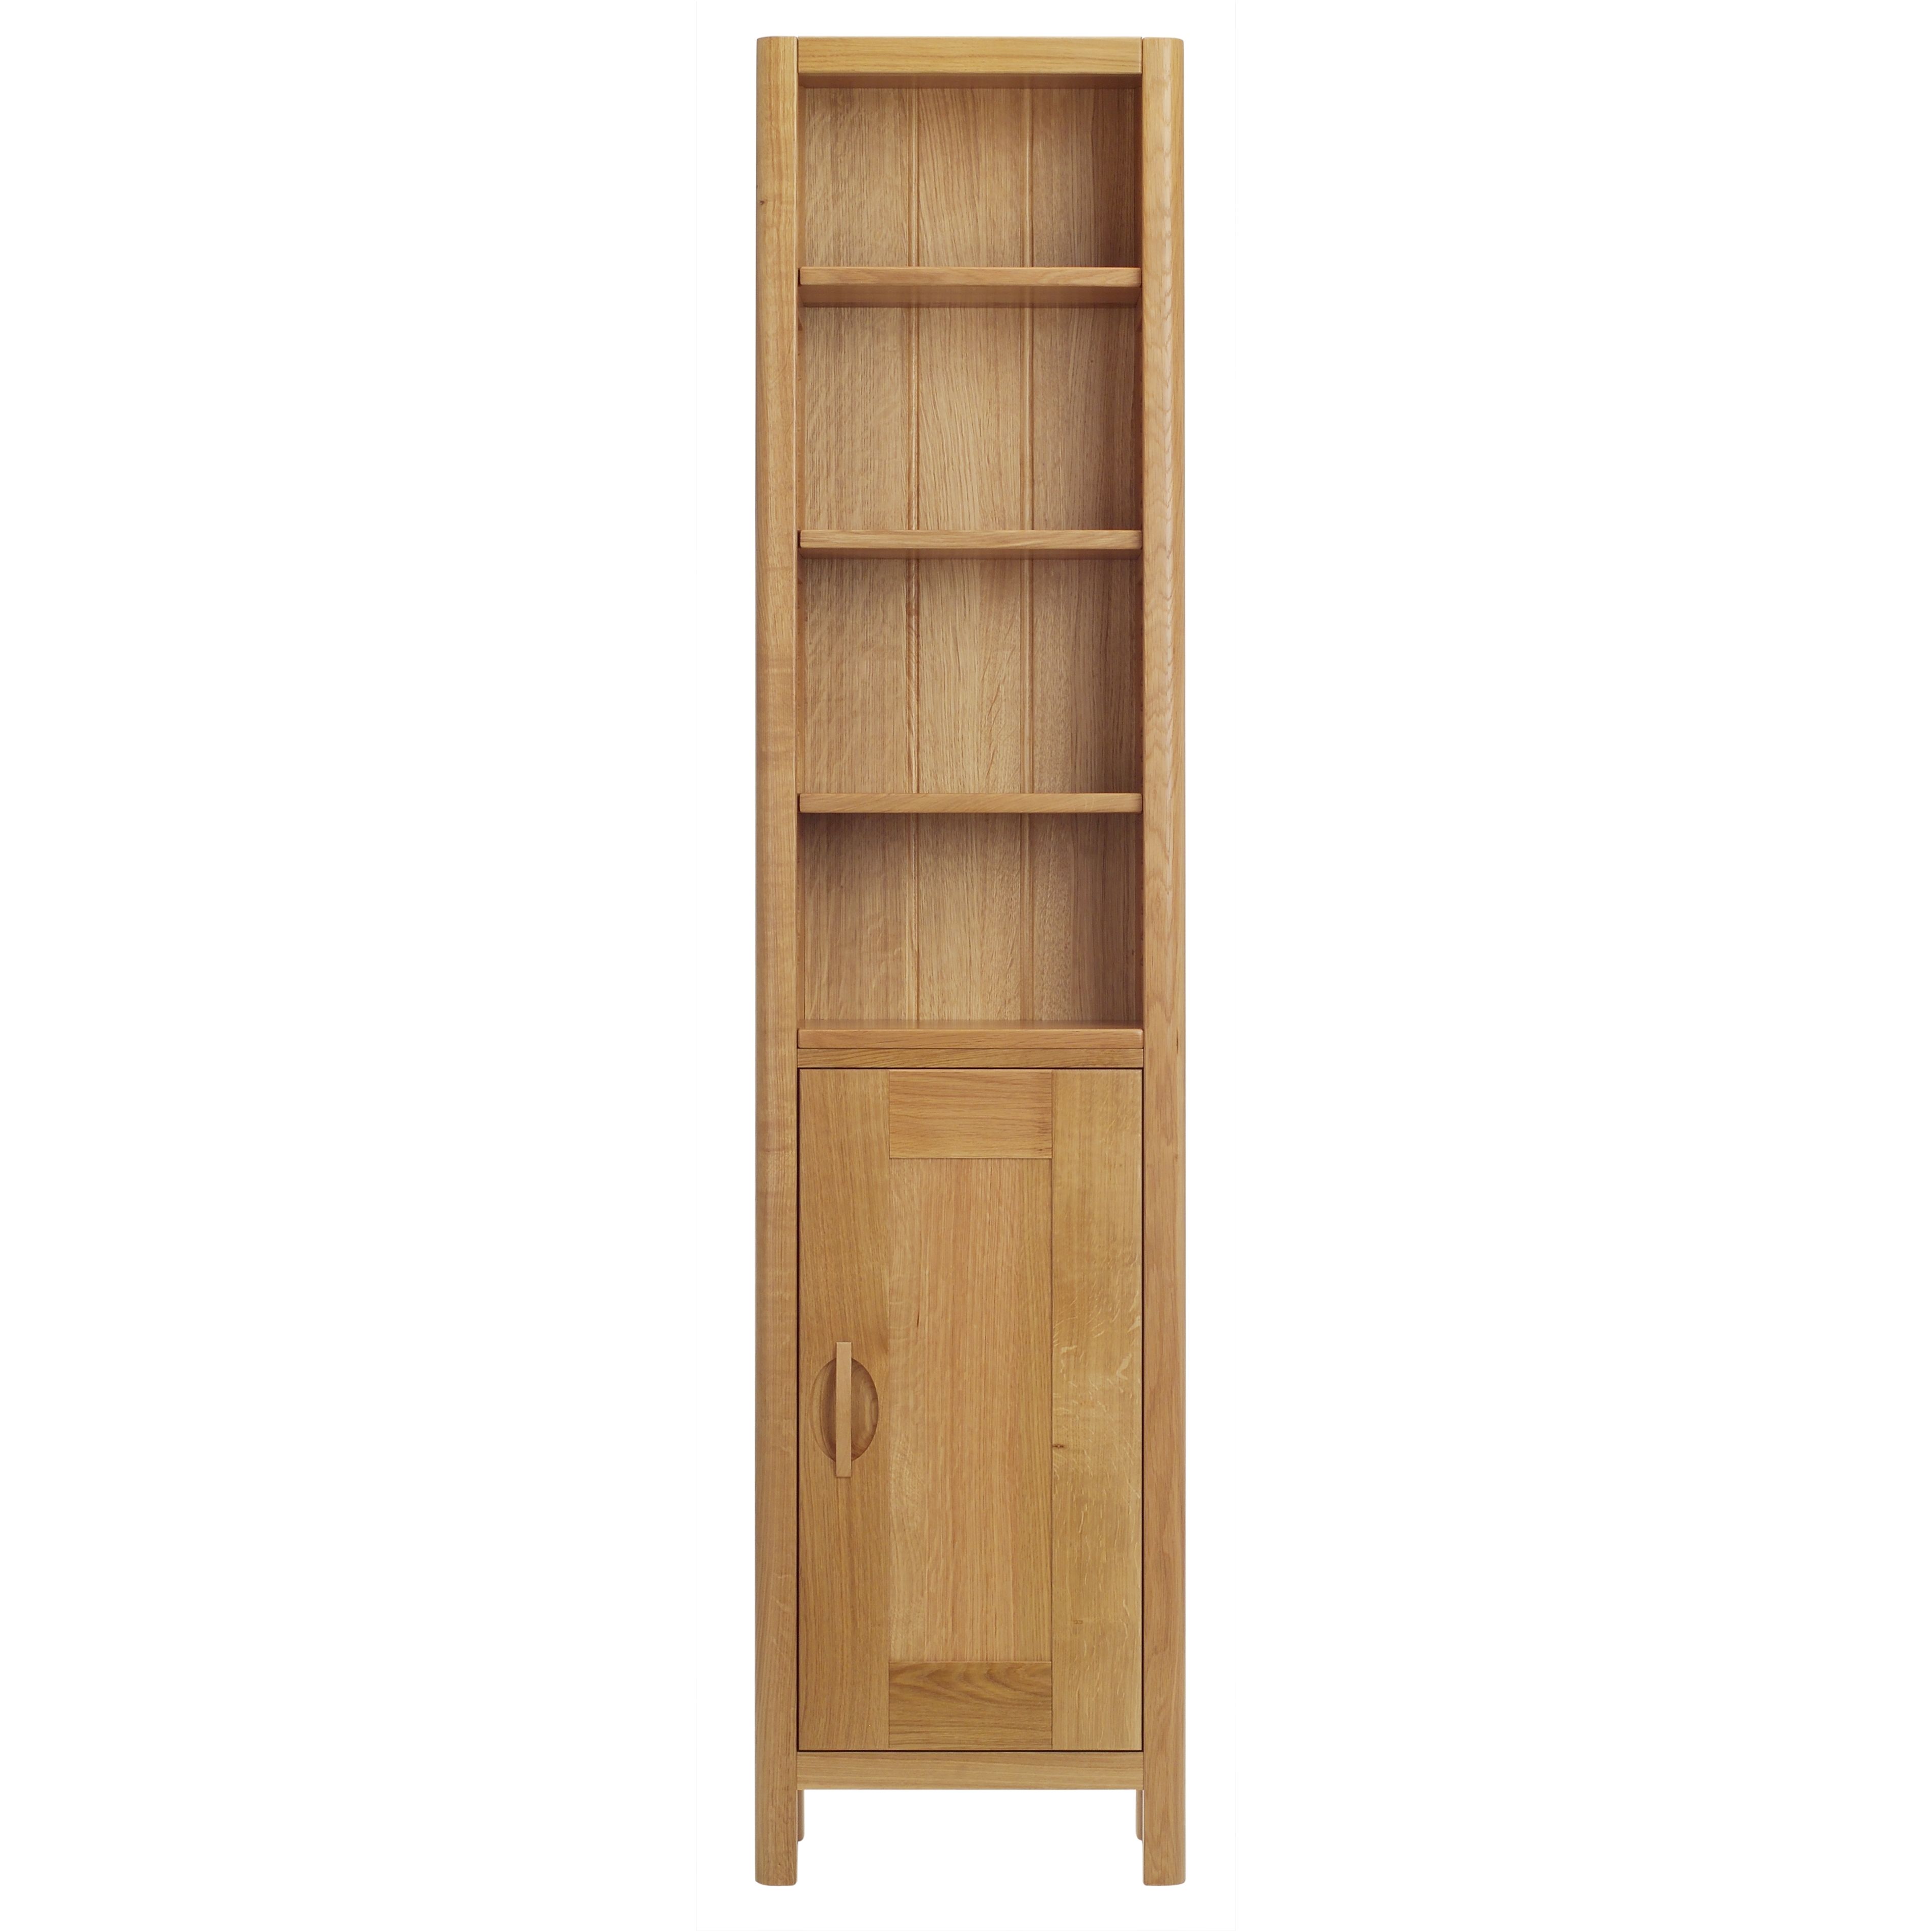 Tall Bookcases With Doors In Current Bookcase: Gorgeous Tall Narrow Bookcase For Book Organizer Idea (View 8 of 15)